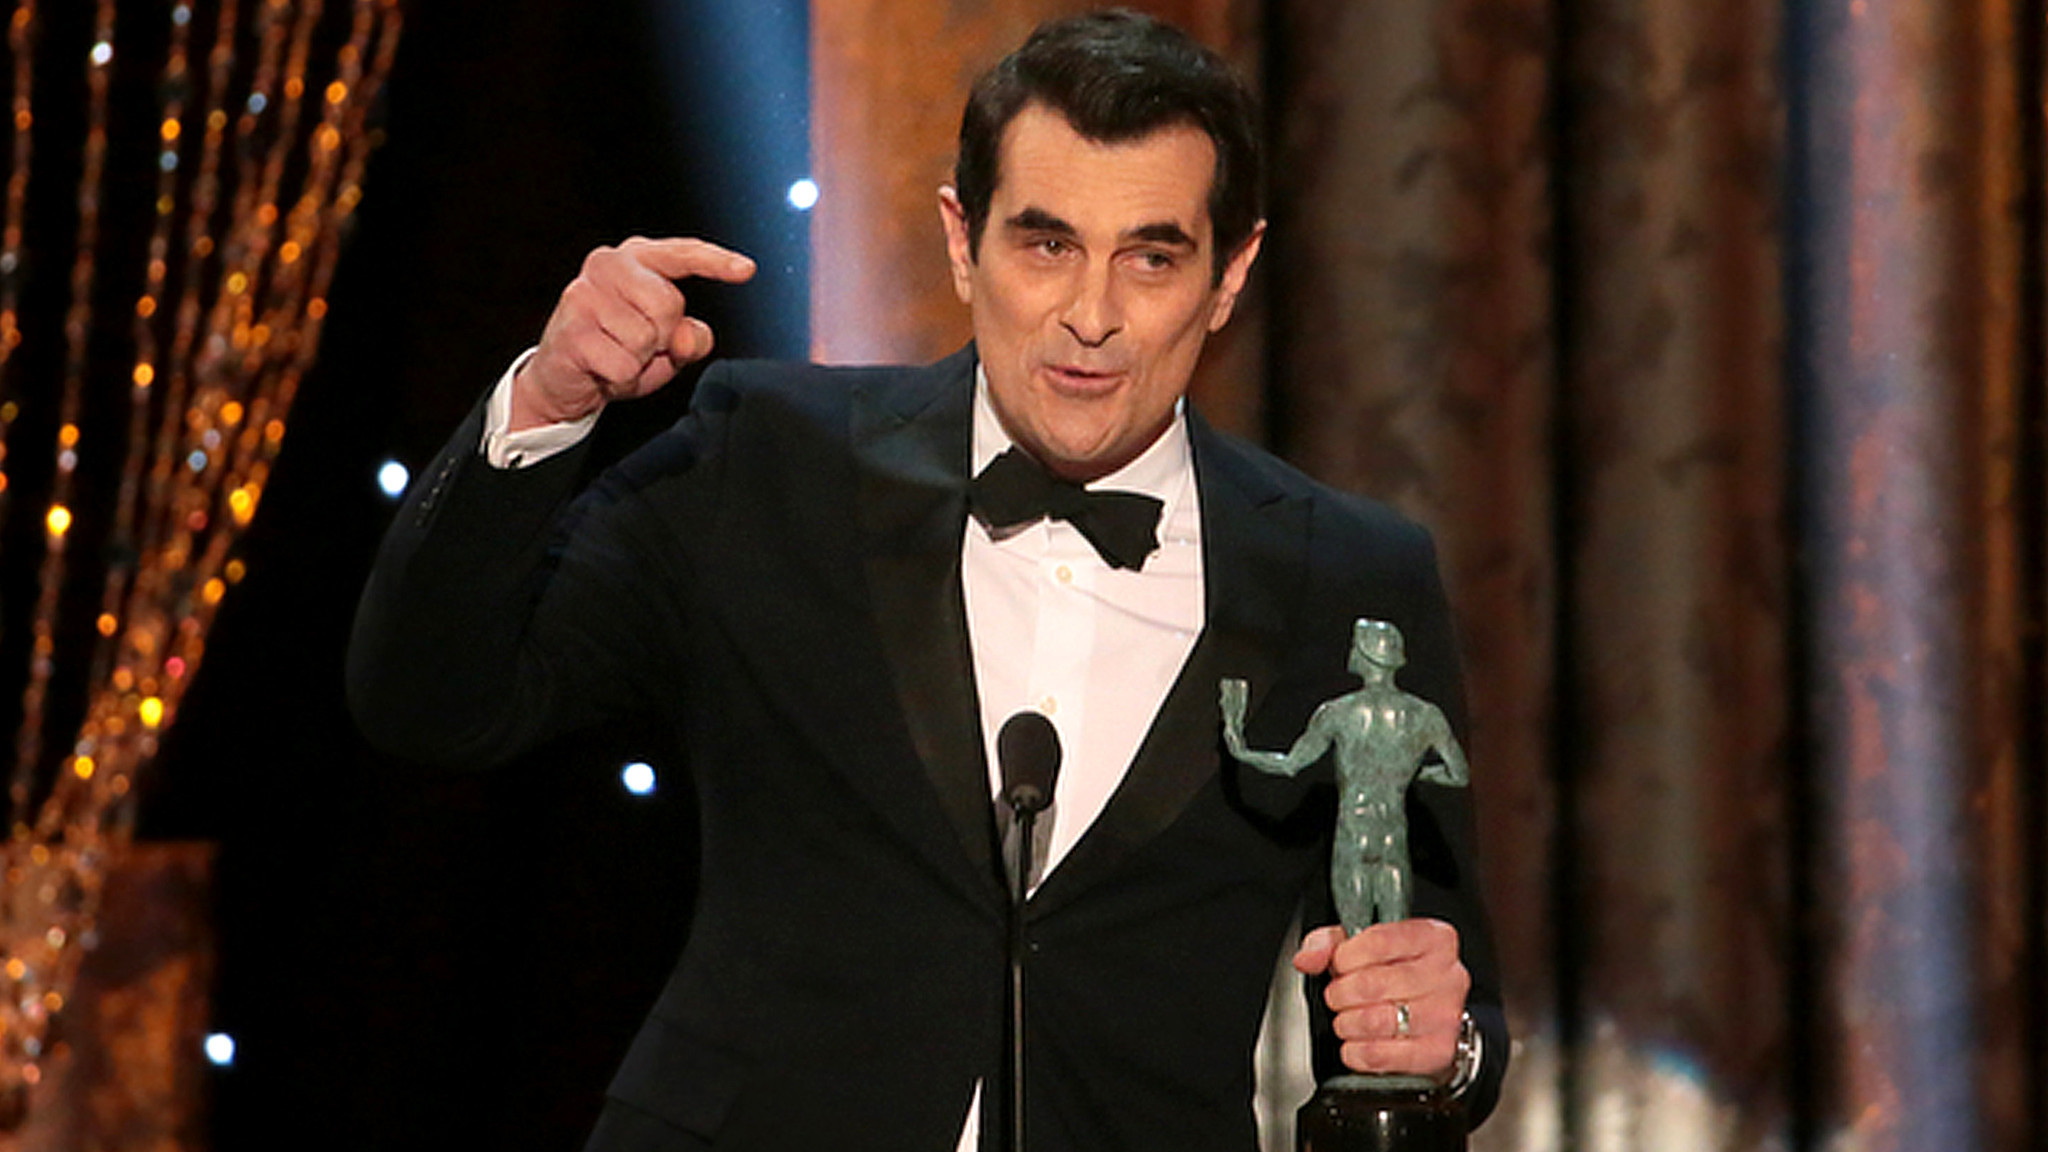 The Rams have come home to Hollywood, delighting fan Ty Burrell Los Angeles...